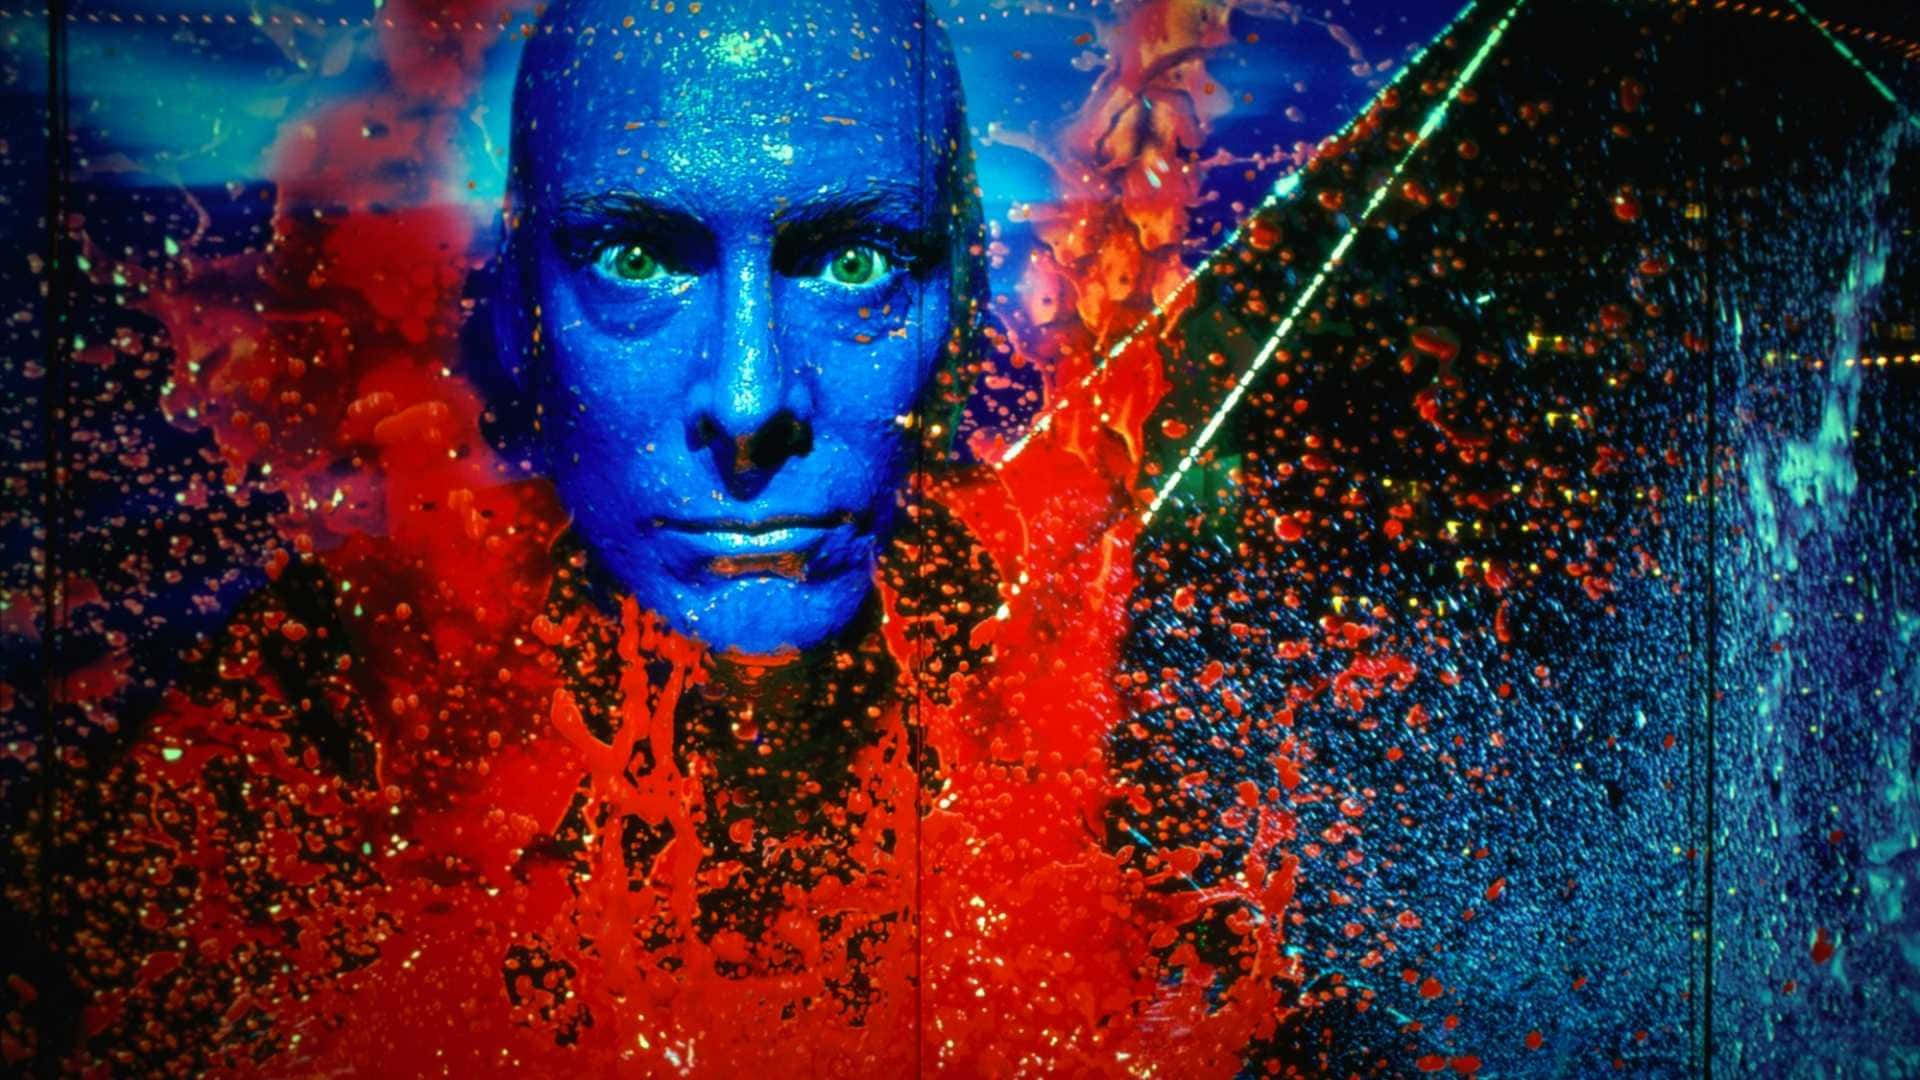 The Blue Man Group - Improvisational Performance and Visual Art Wallpaper